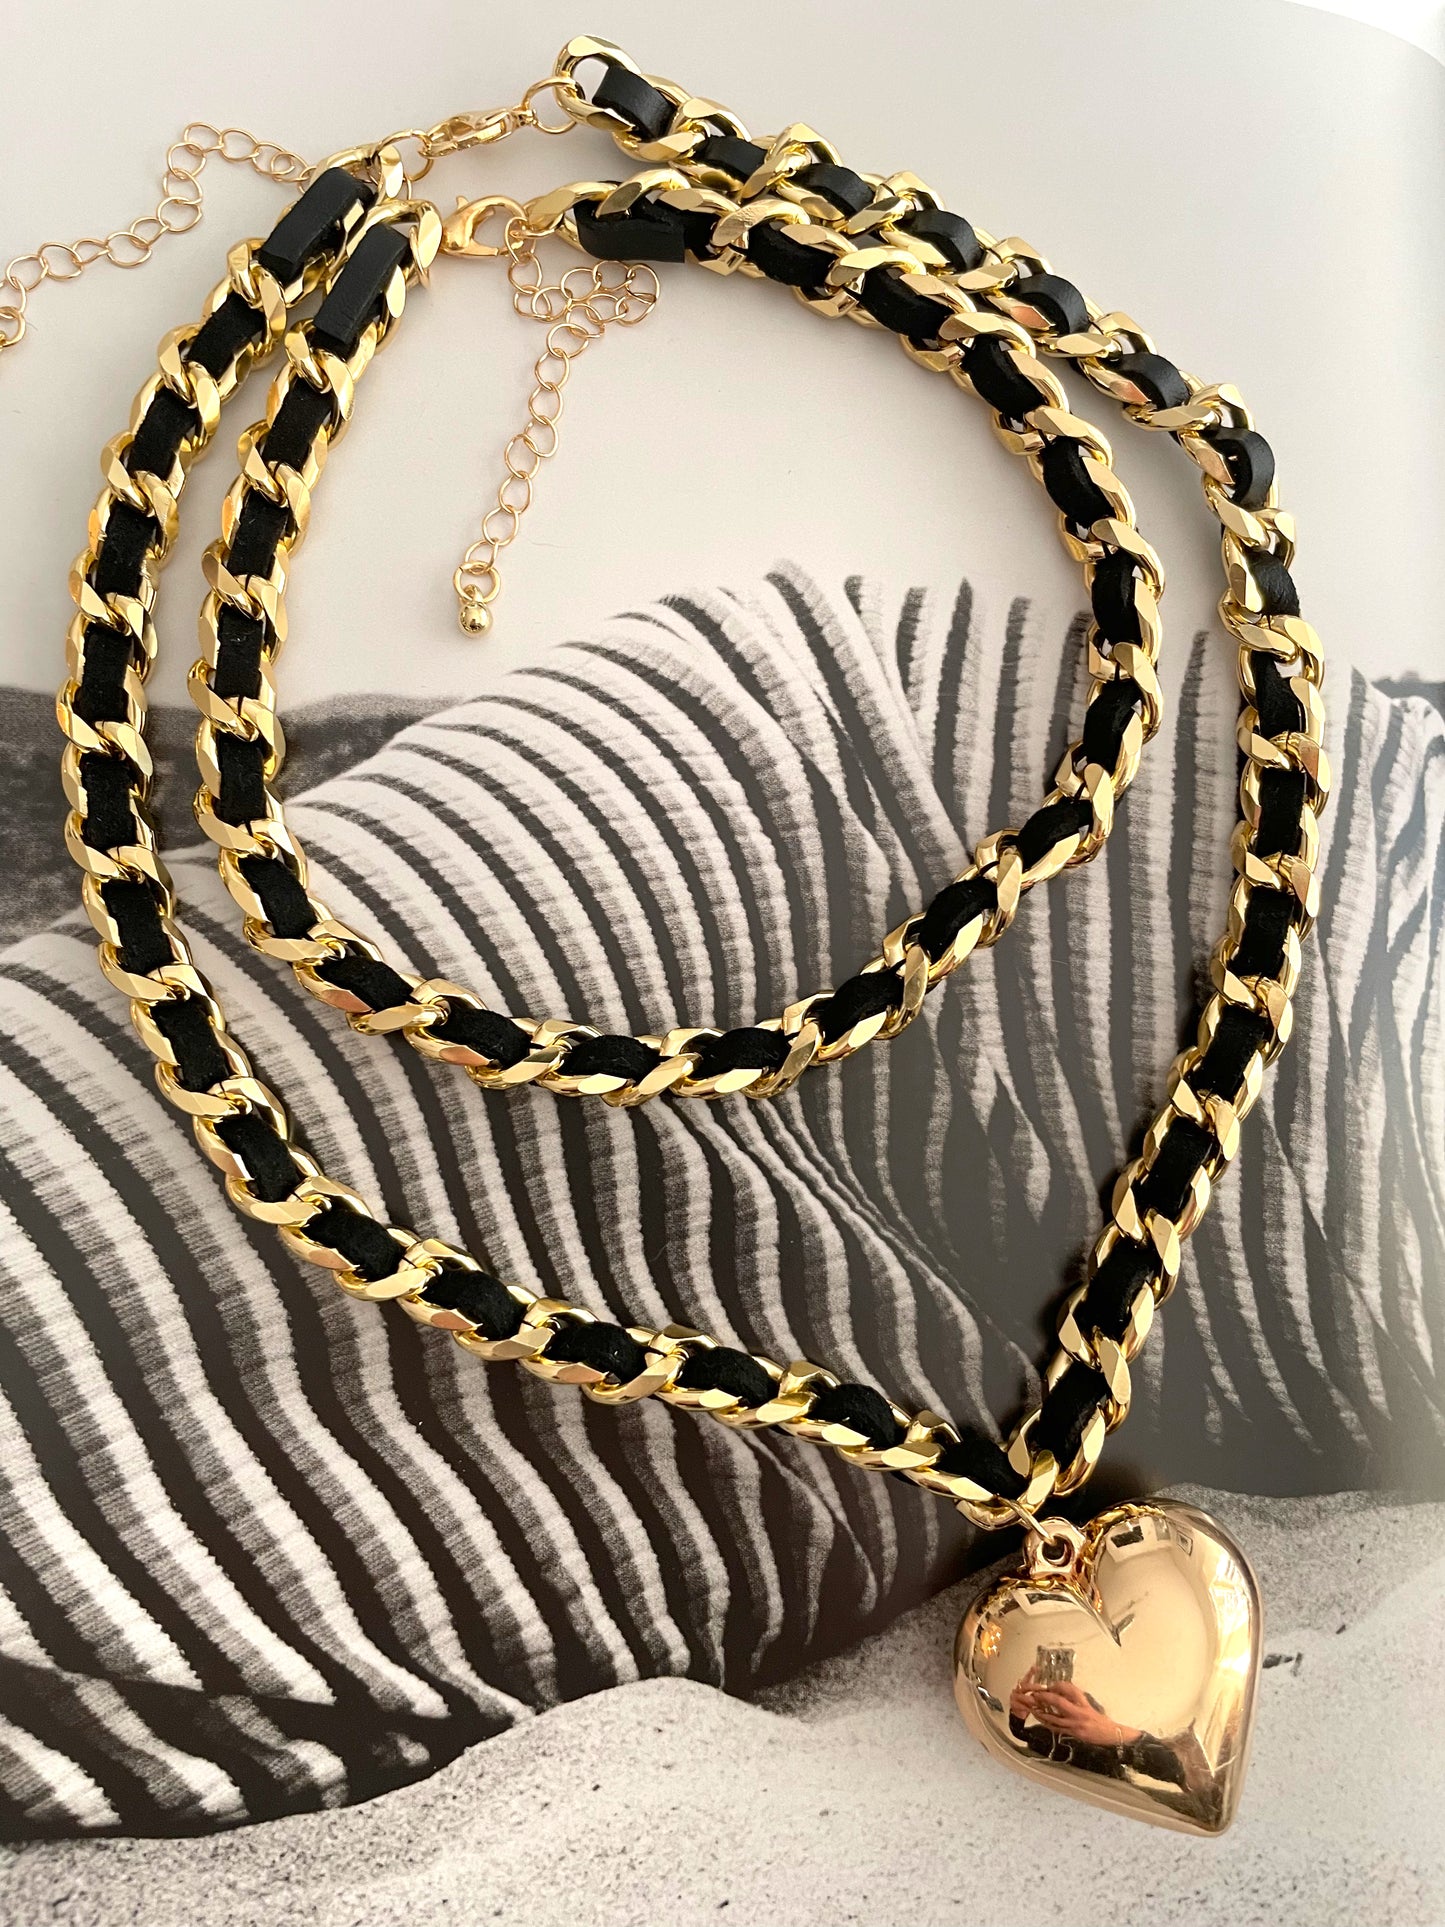 Braided necklace set with heart